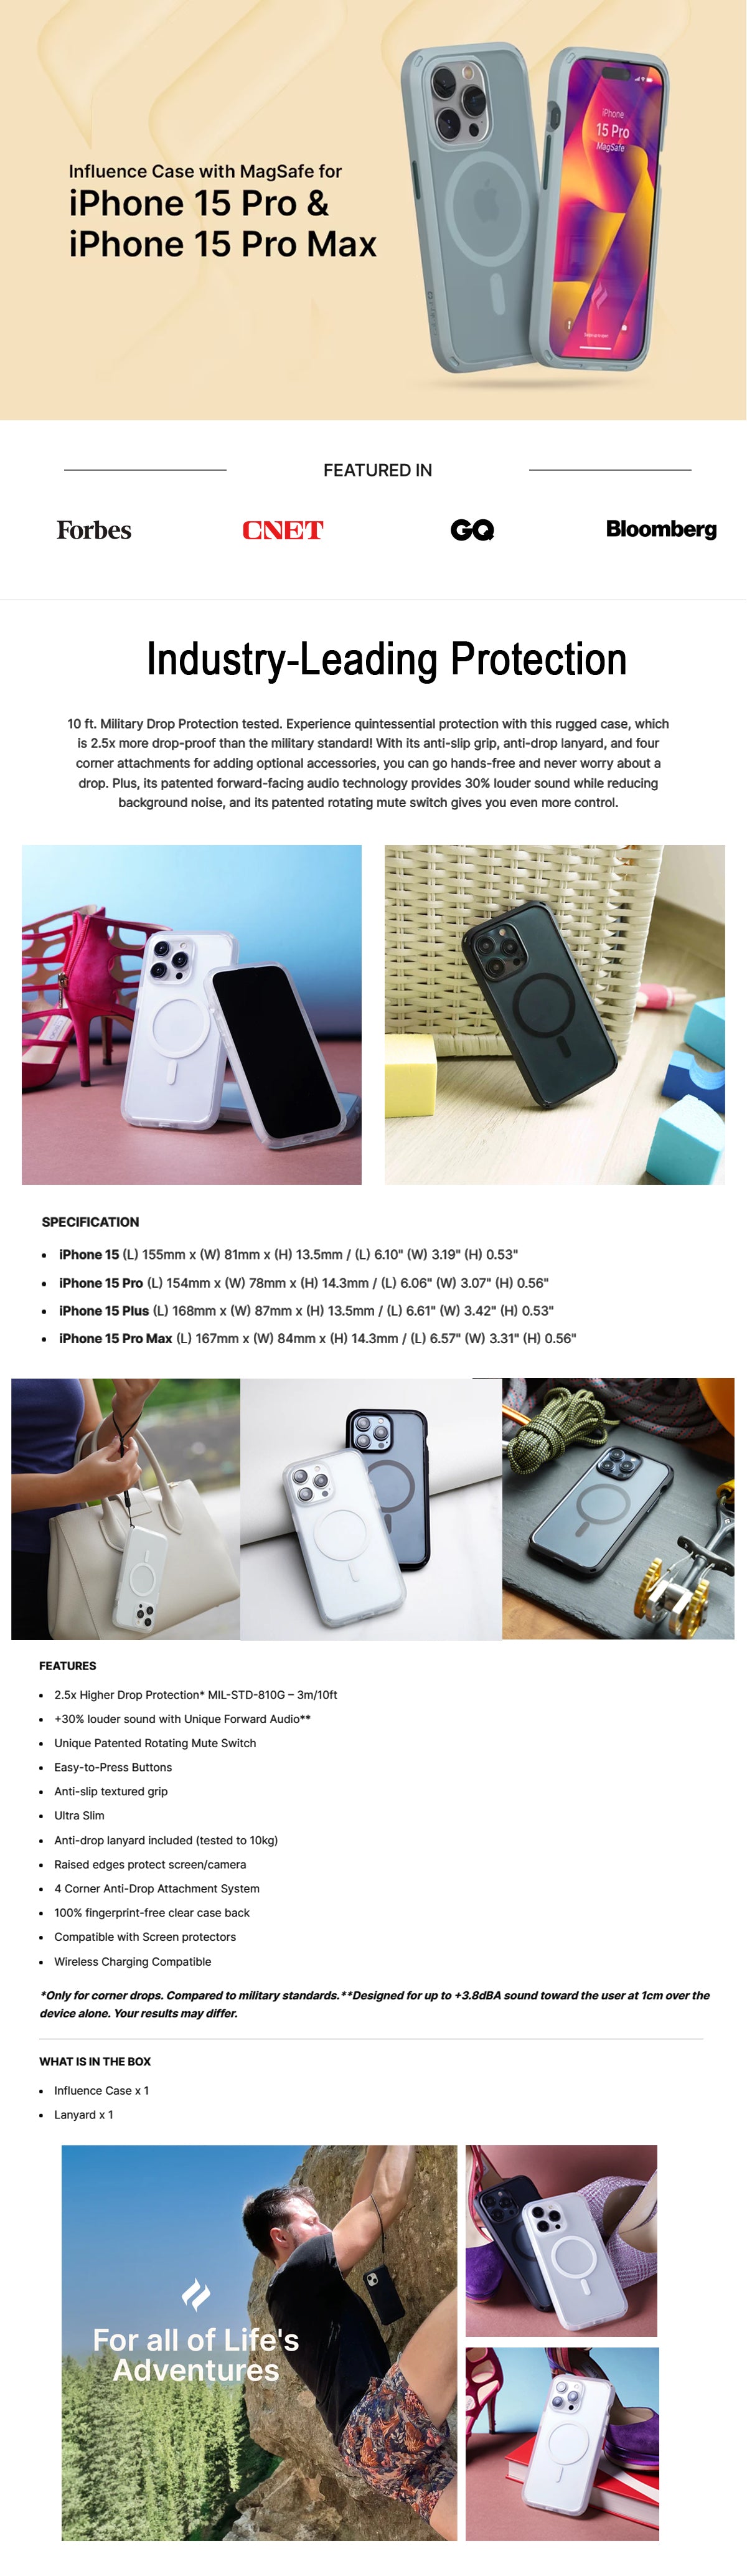 Catalyst Influence Case for iPhone 15 Series- MagSafe Compatible